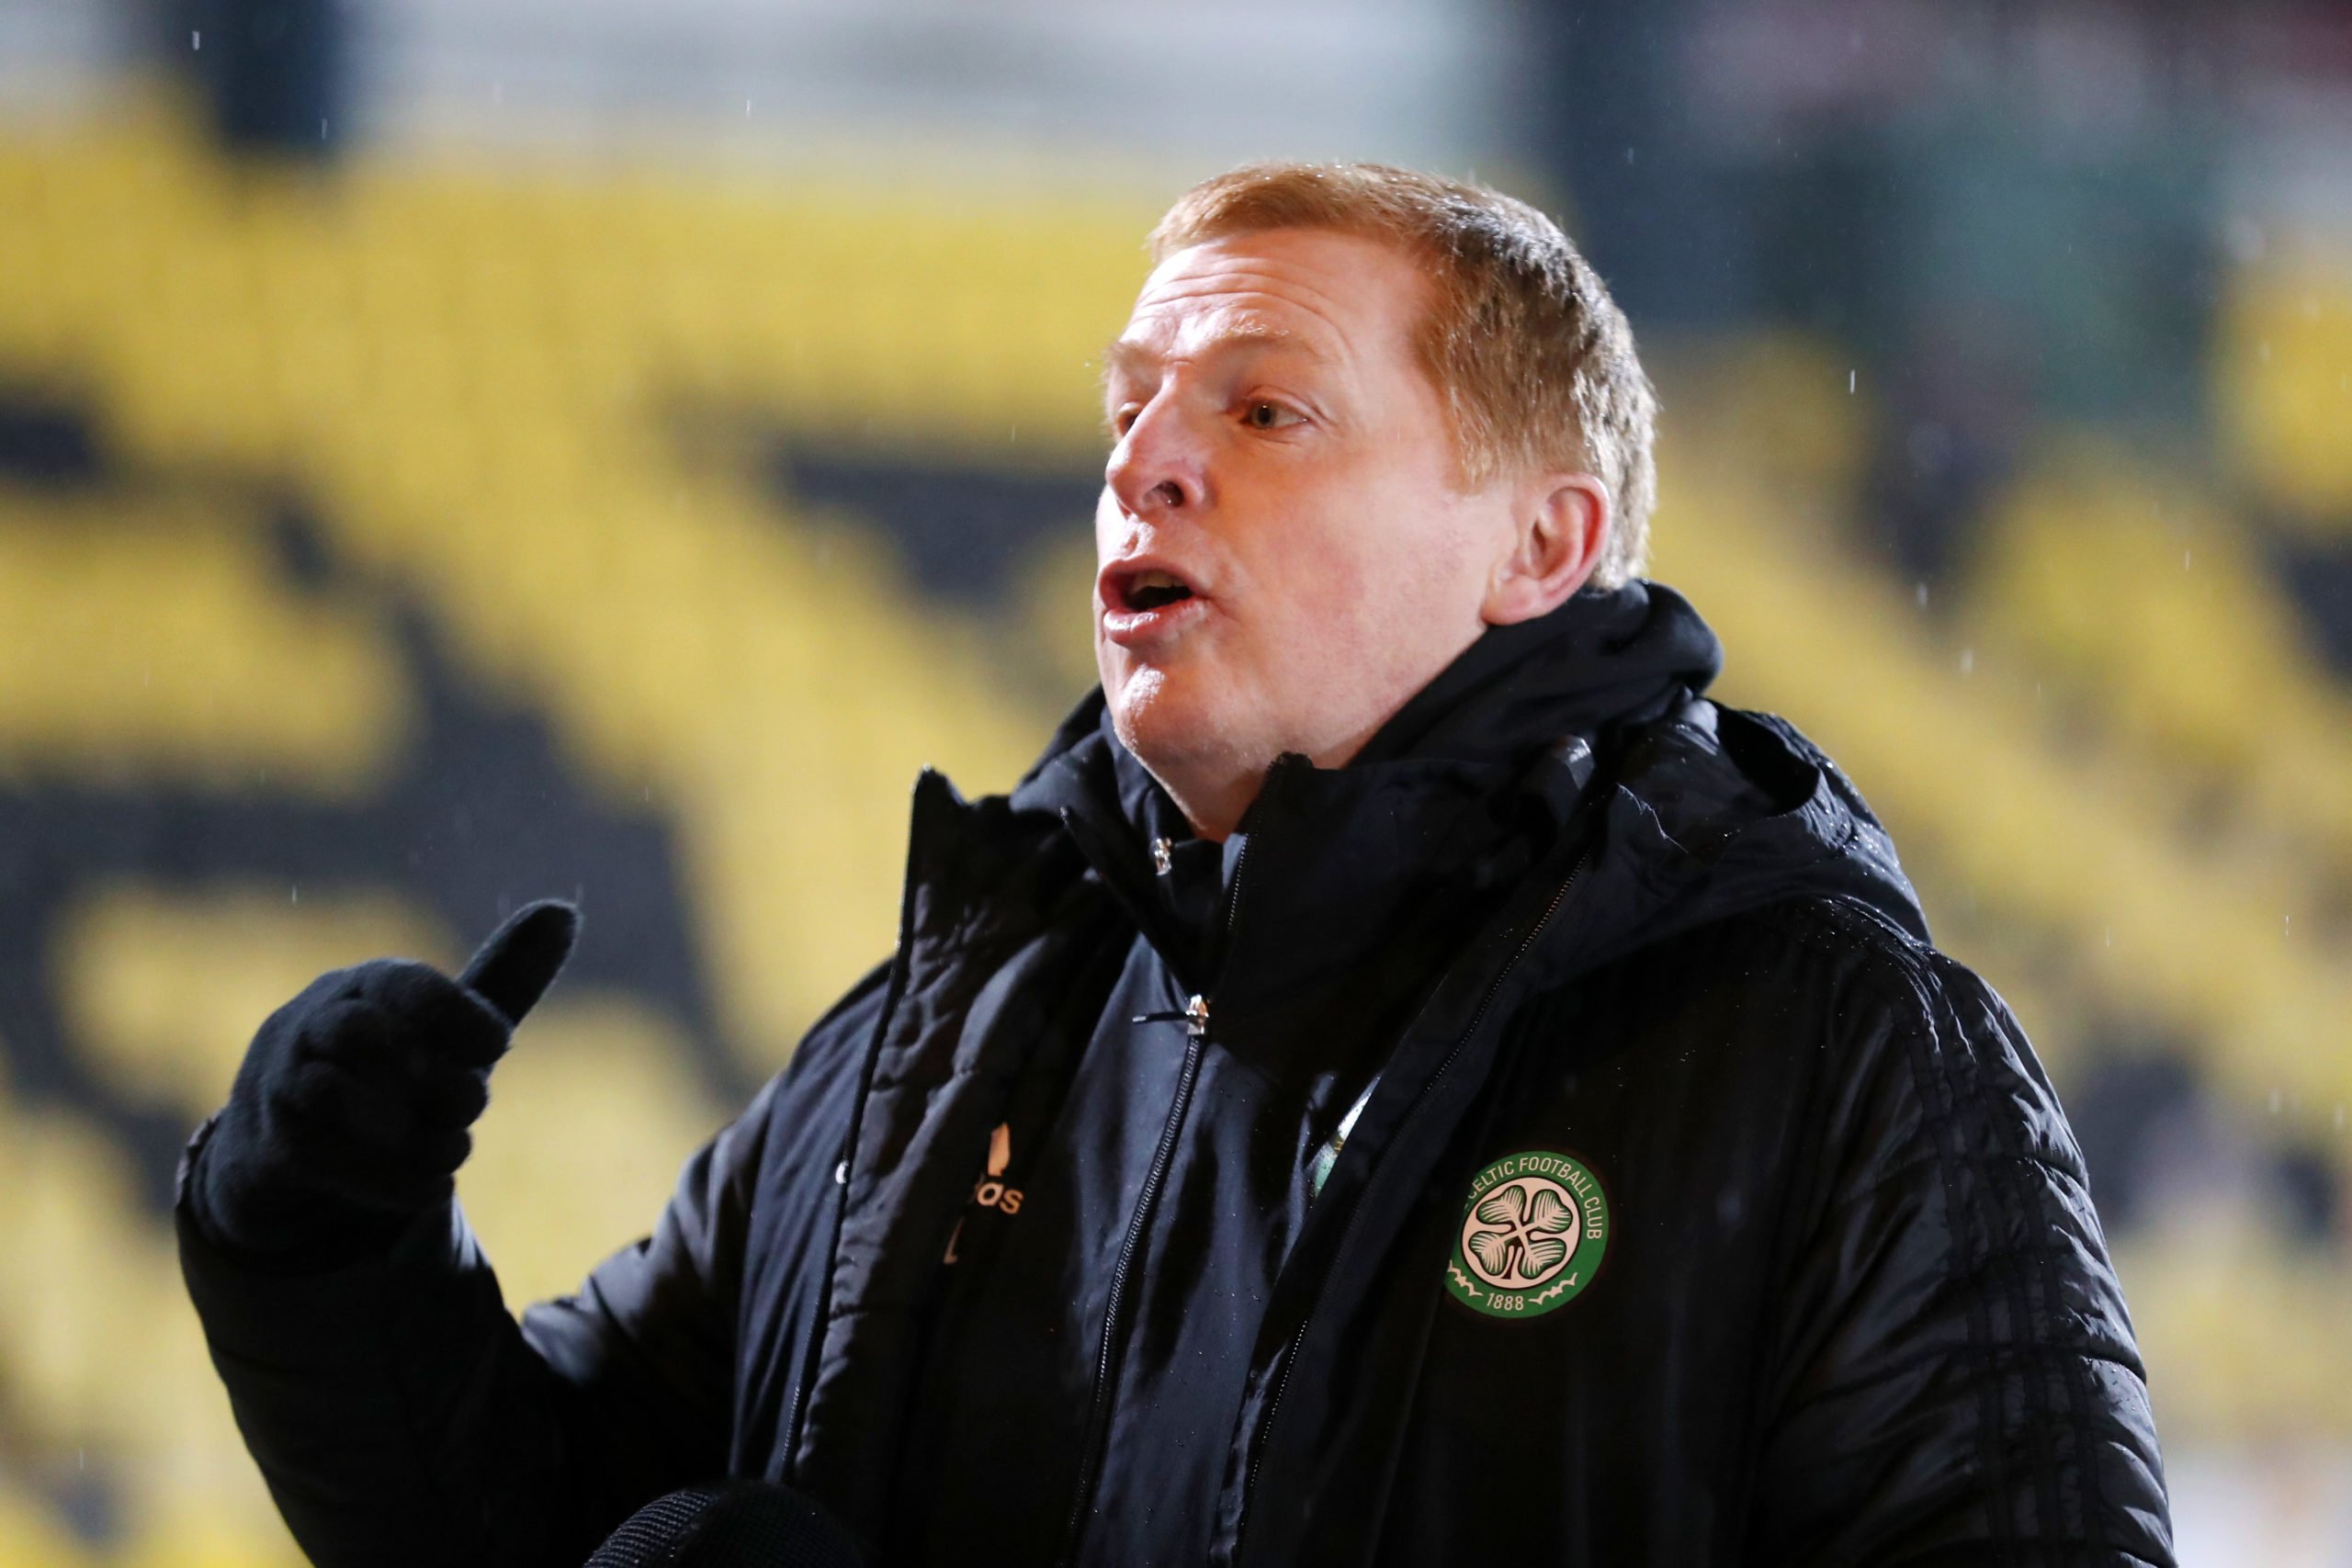 The most worrying thing Celtic boss Neil Lennon said yesterday